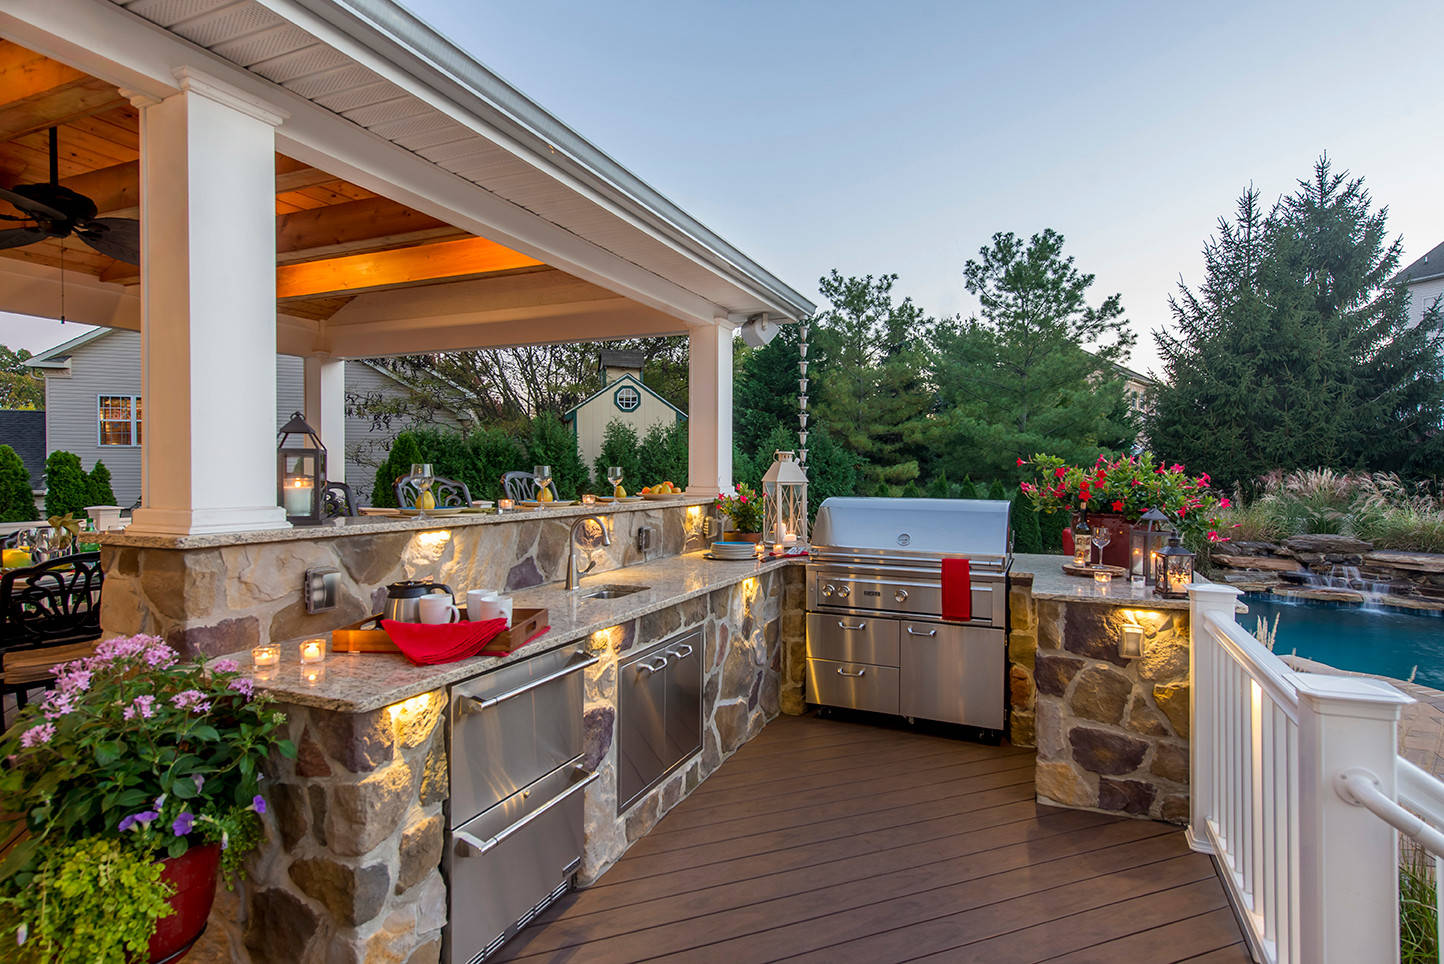 Rob Cardillo
Inspiration for a mid-sized timeless backyard outdoor kitchen deck remodel in Philadelphia with a roof extension